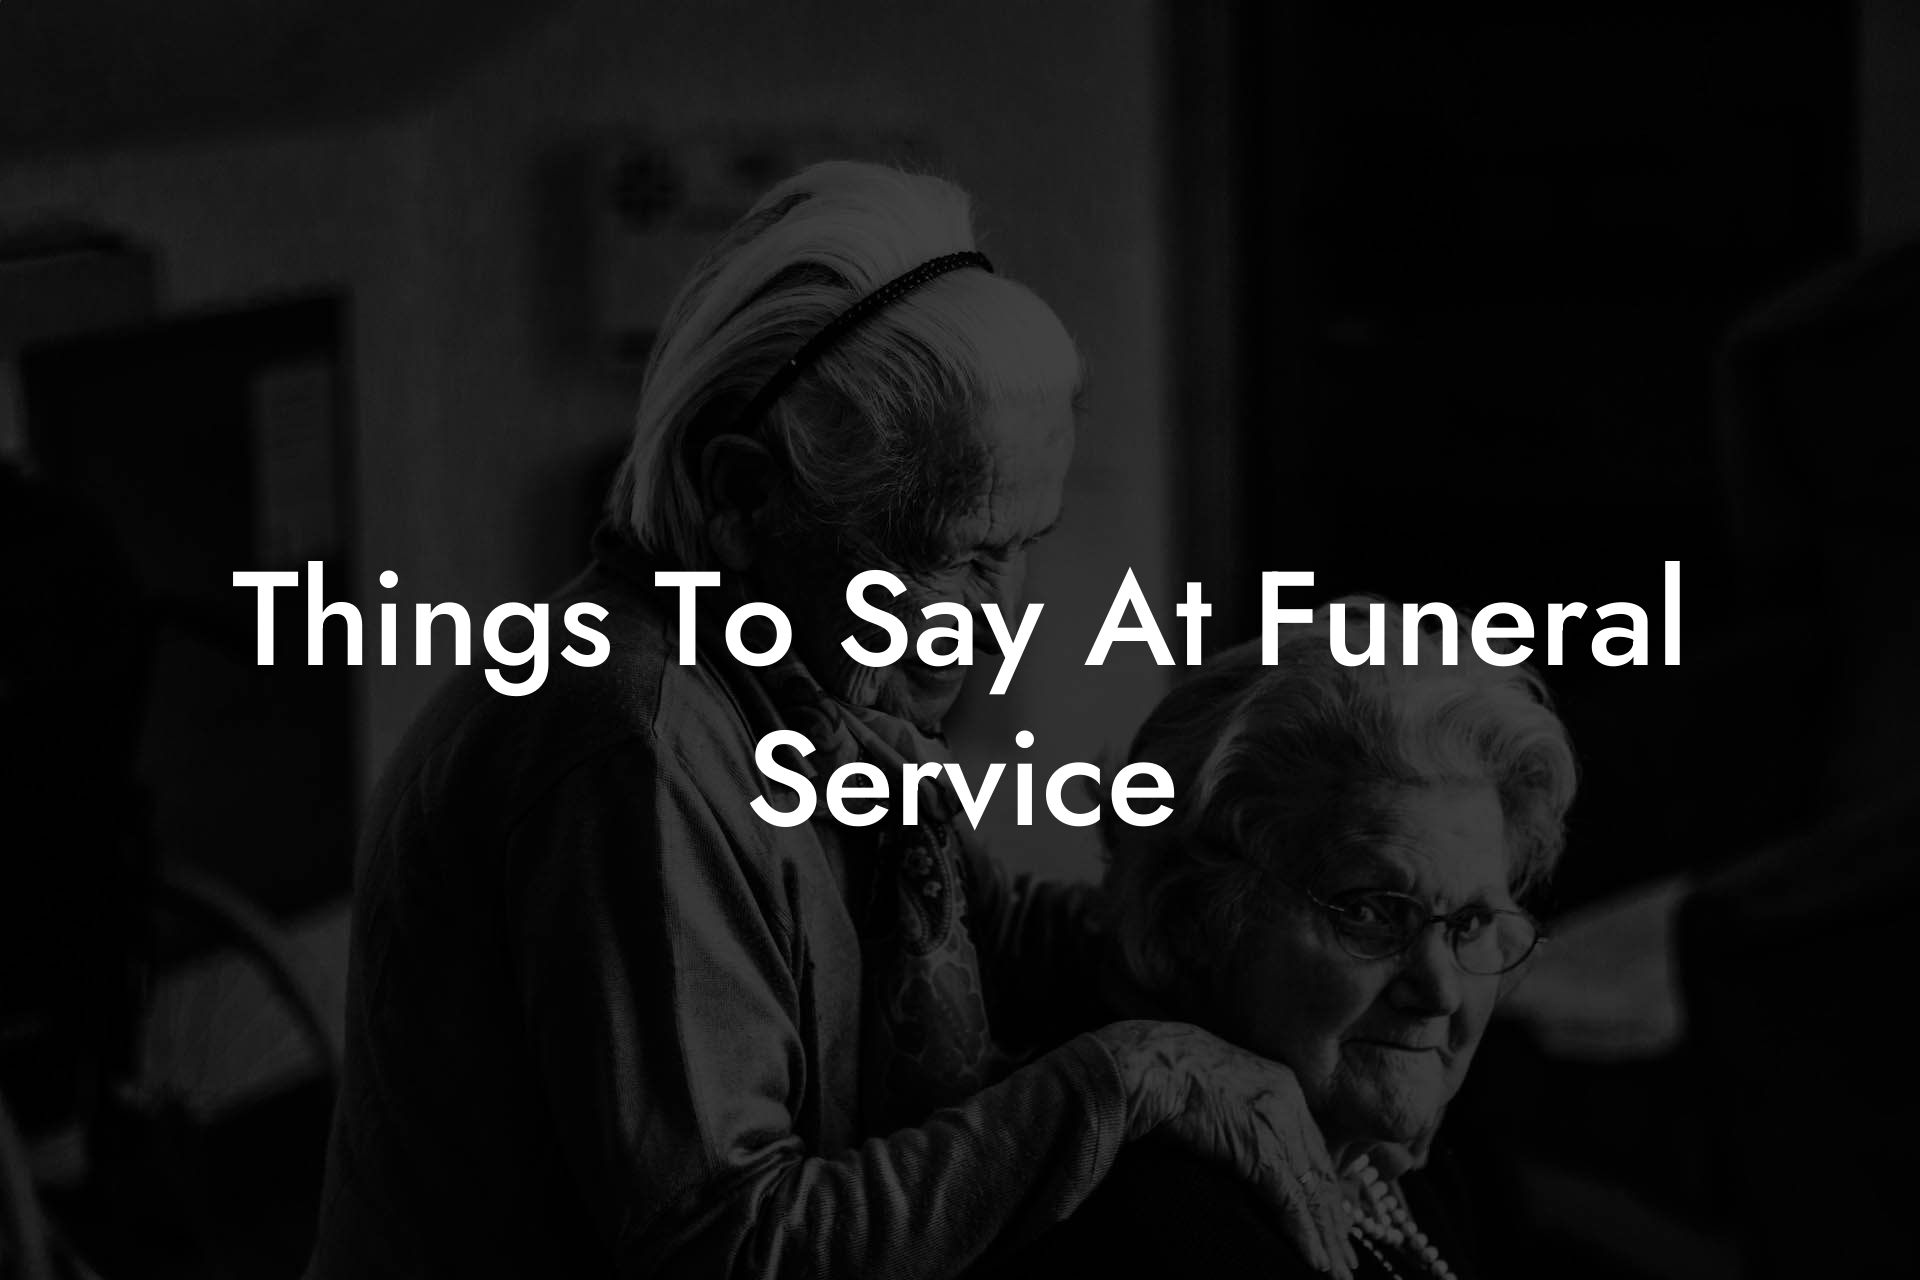 Things To Say At Funeral Service